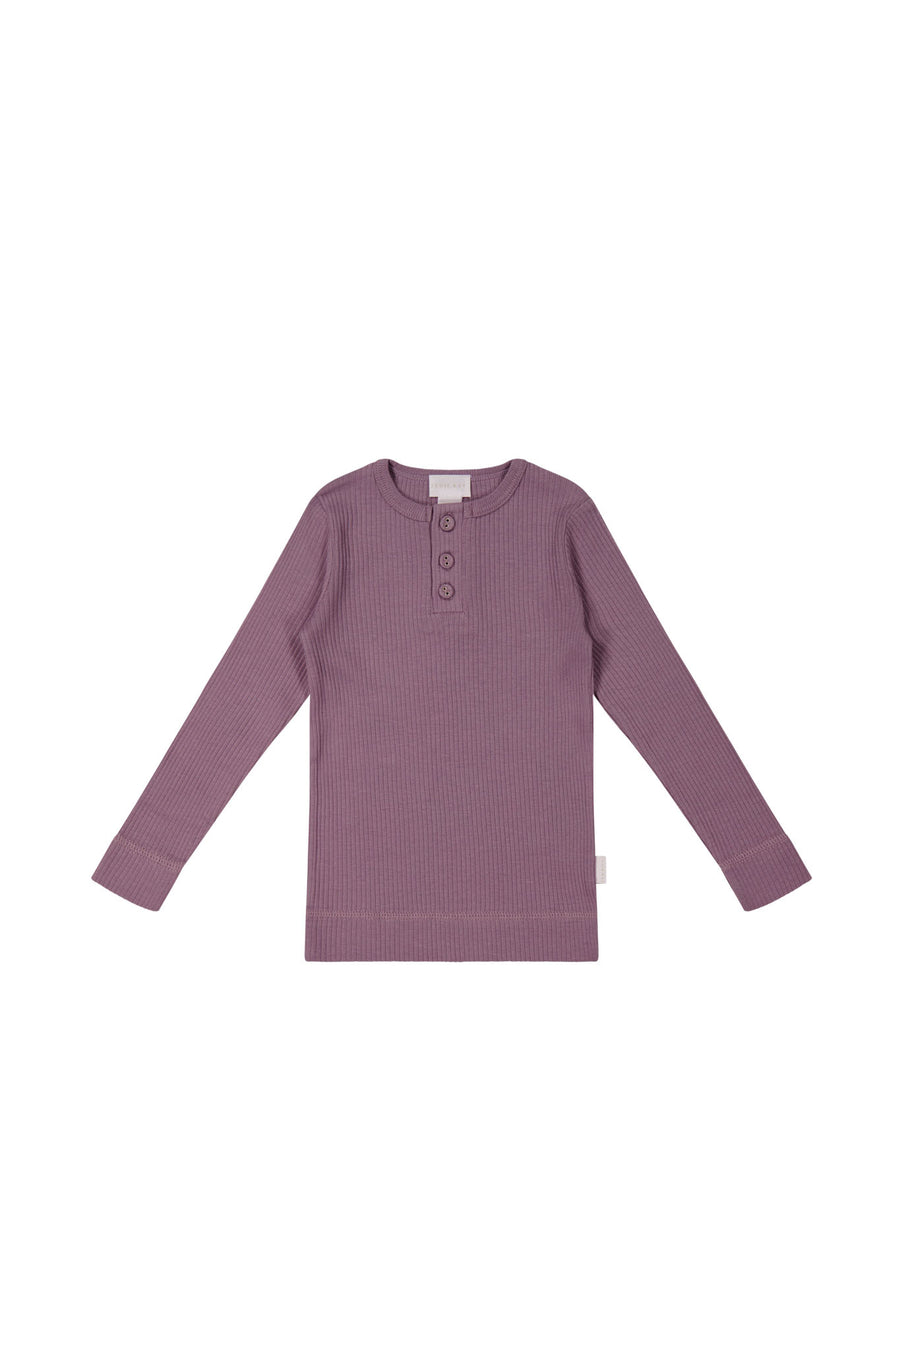 Organic Cotton Modal Long Sleeve Henley - Della Childrens Top from Jamie Kay NZ